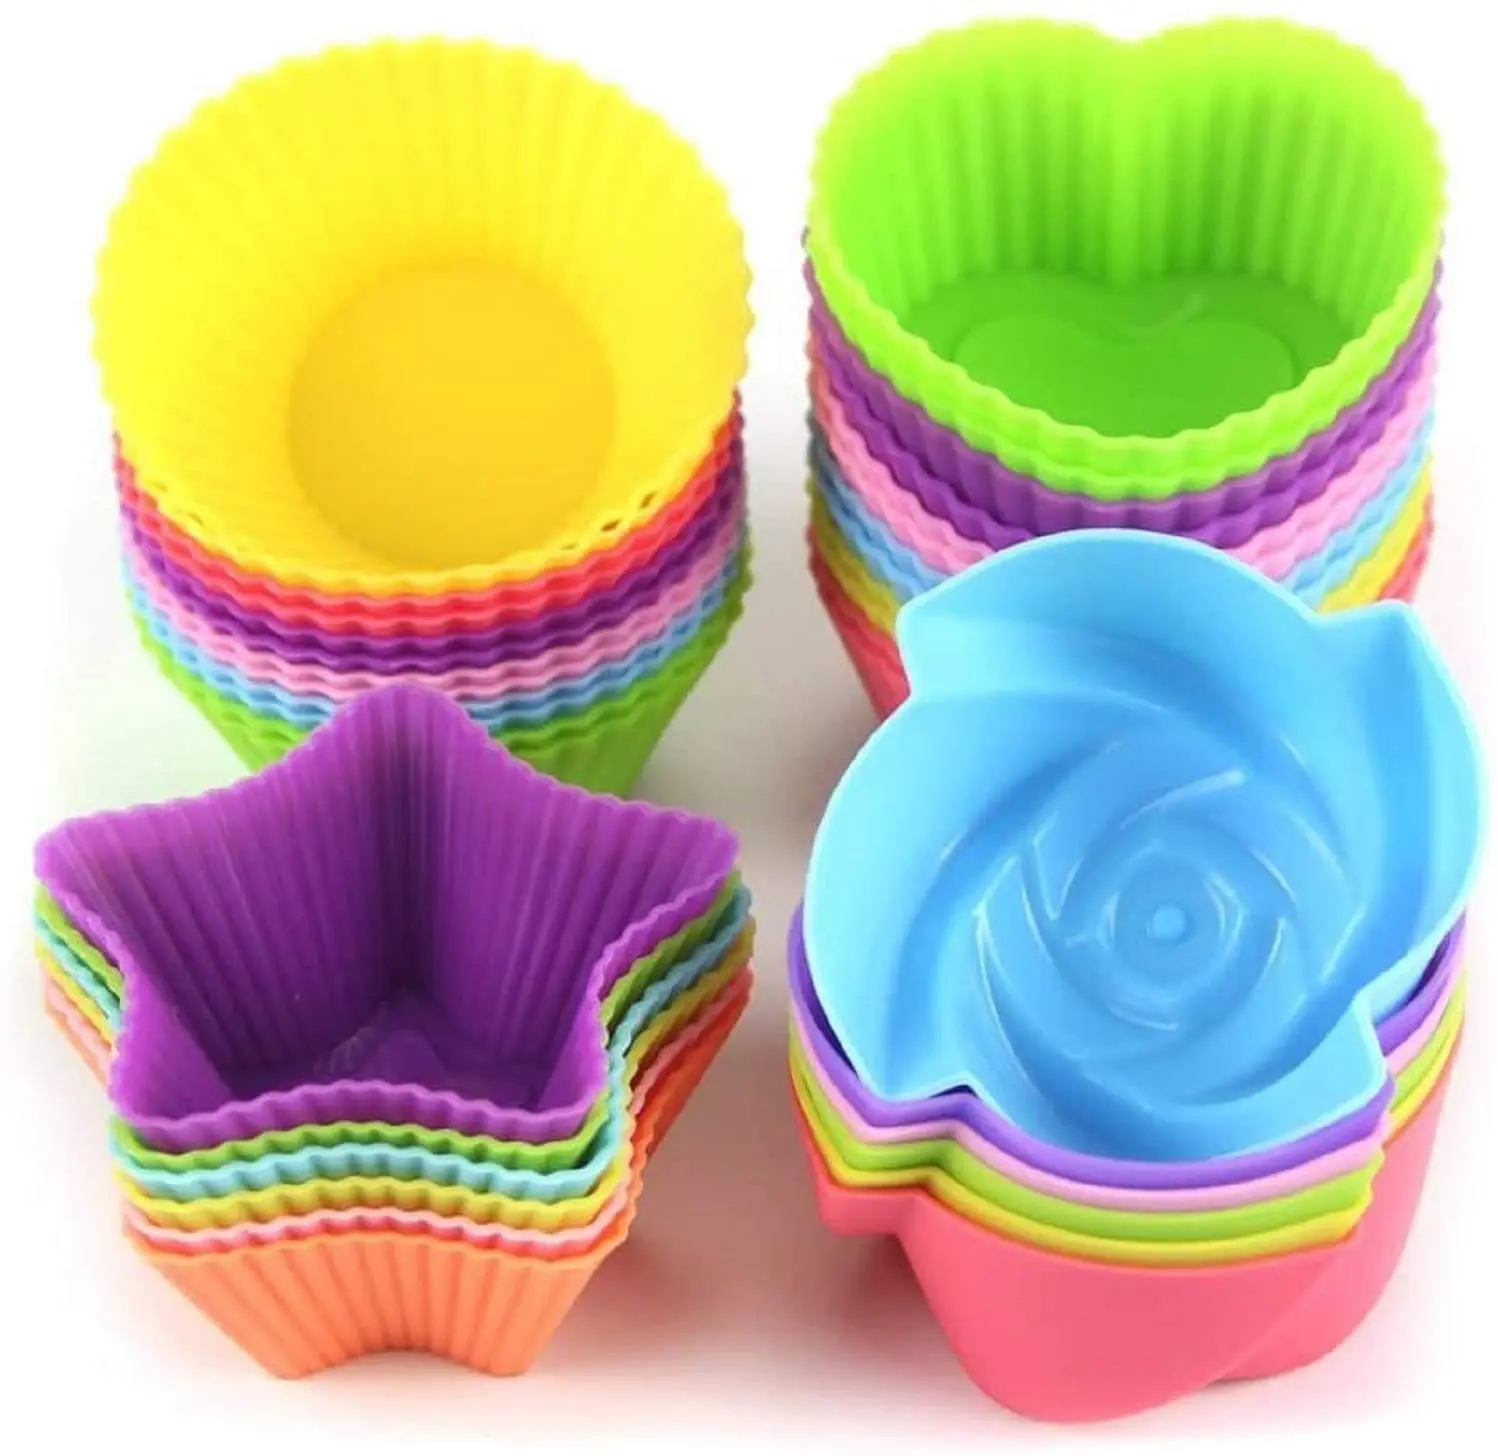 

Amazon Hot Sell Reusable Silicone Cake Baking Molds Muffin Cups Cupcake Baking Liners